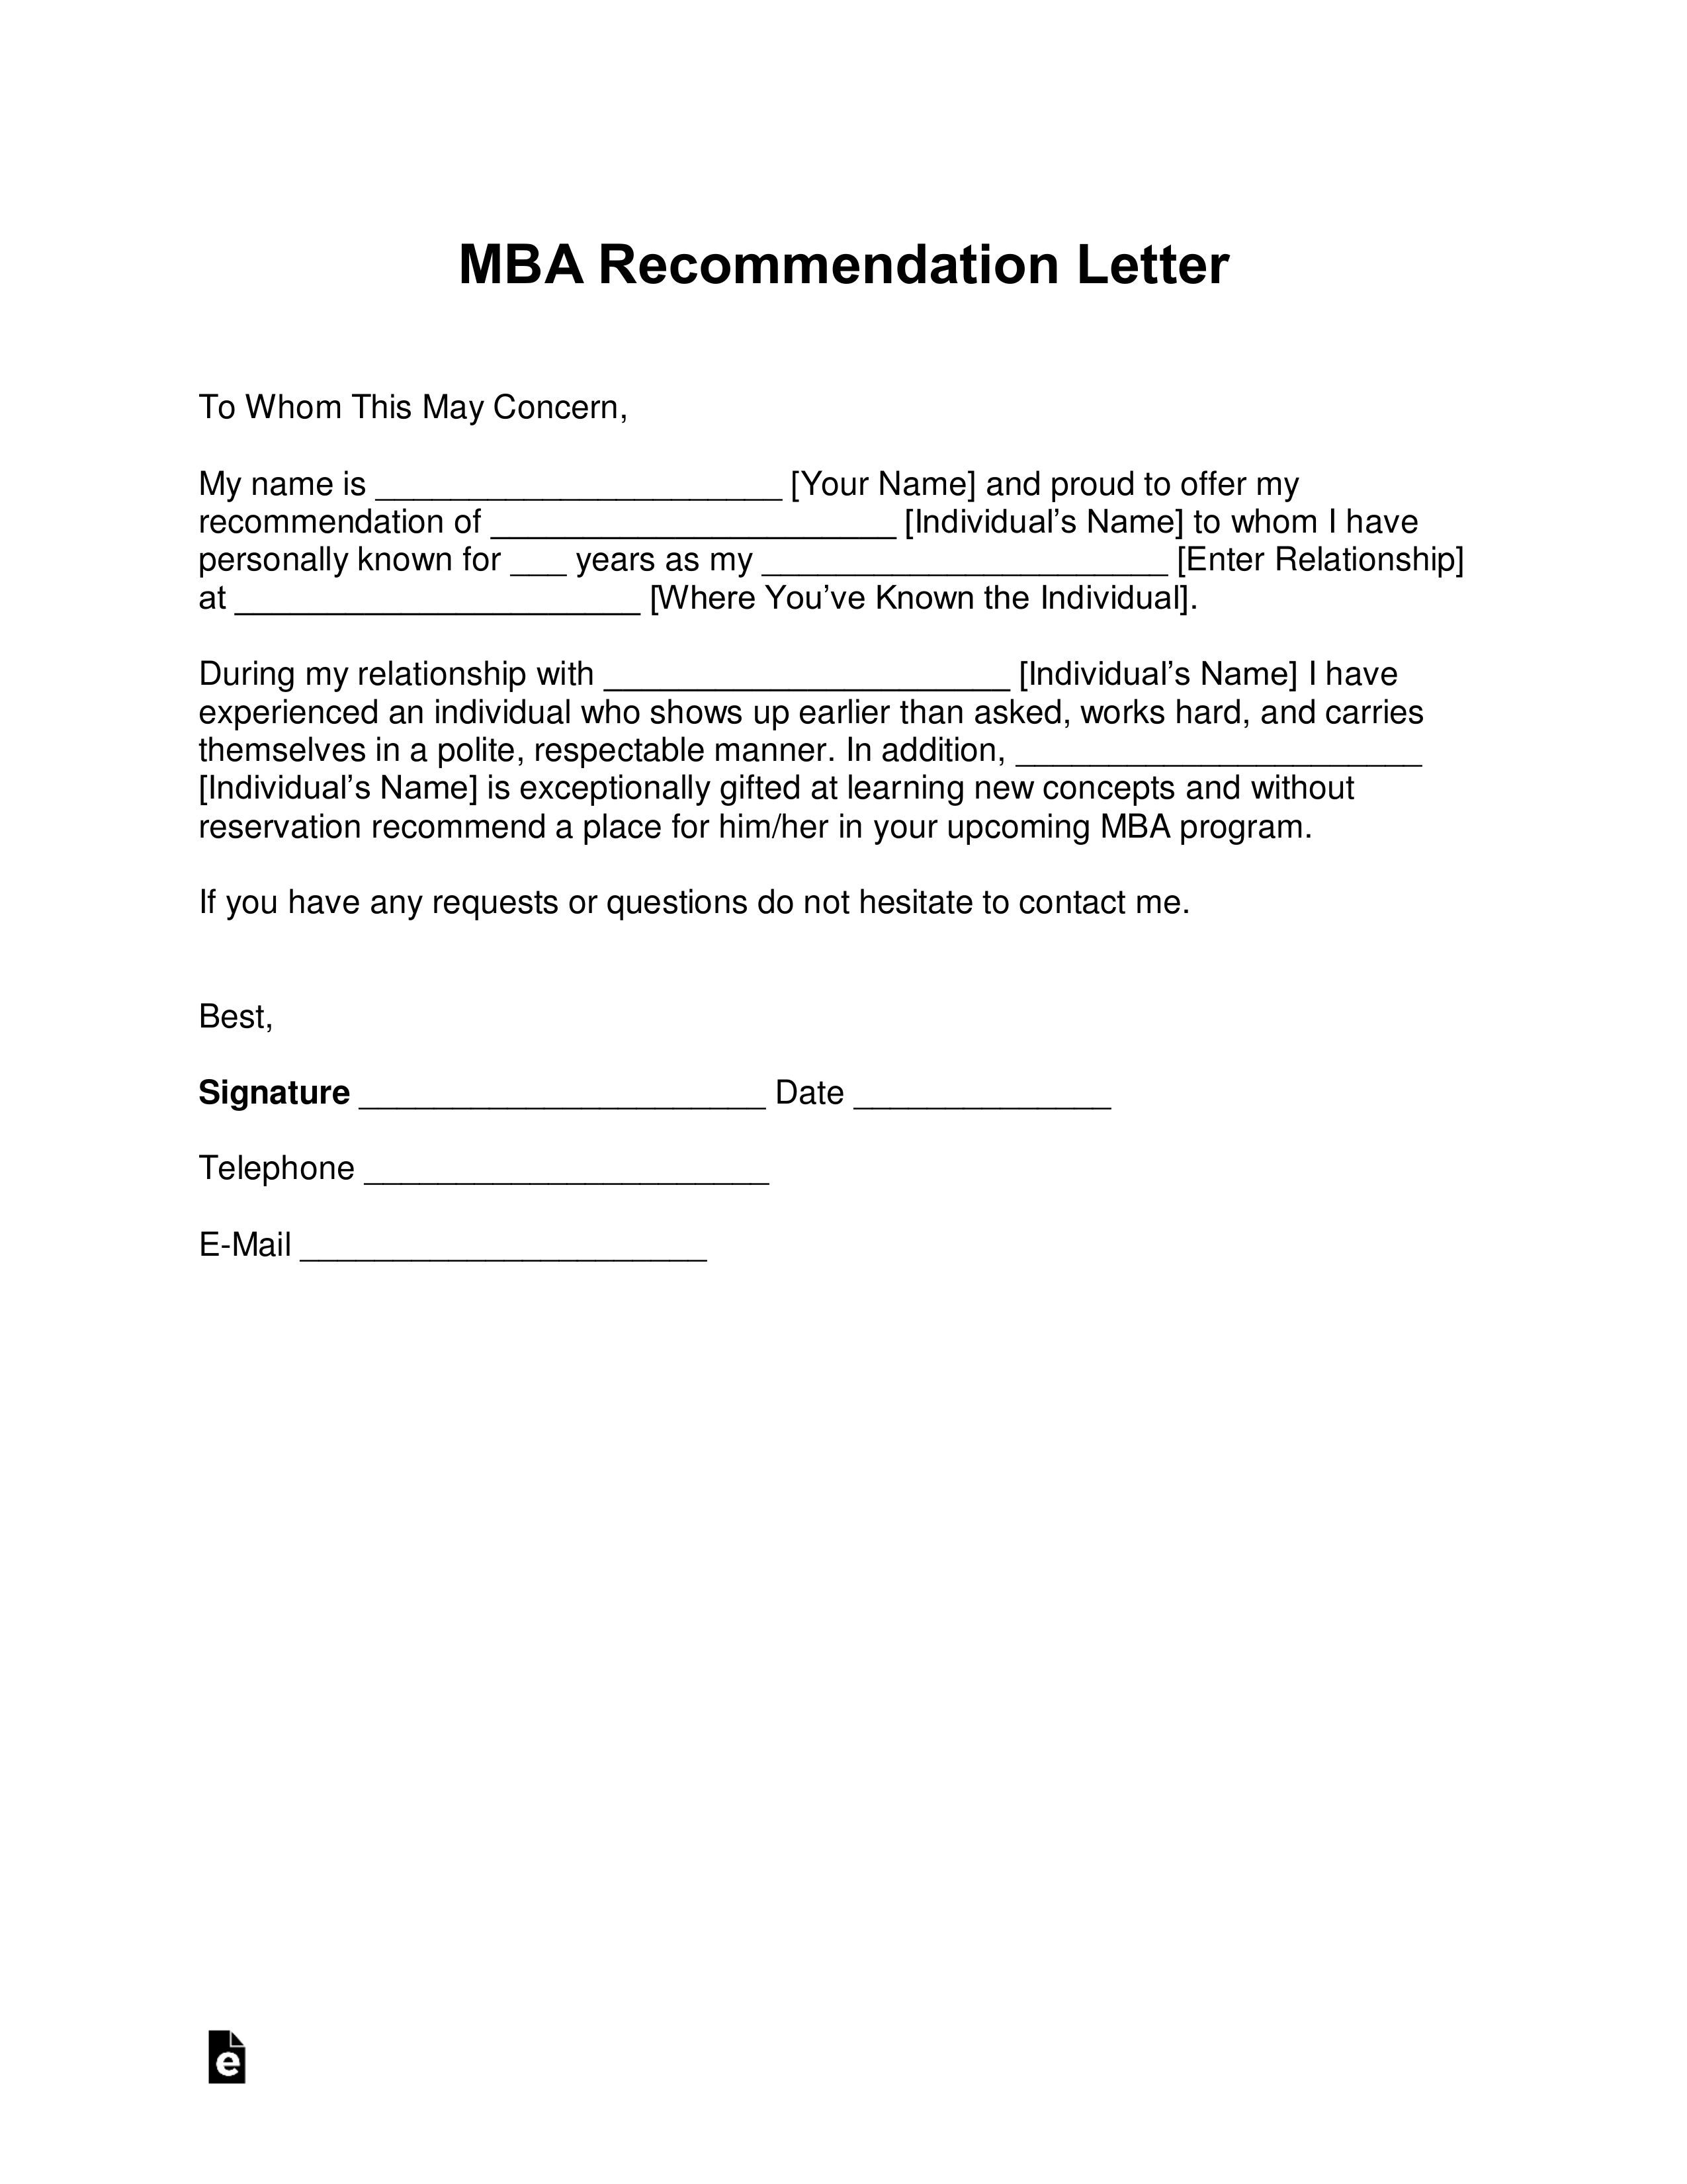 Letter Of Recommendation From Employer from eforms.com